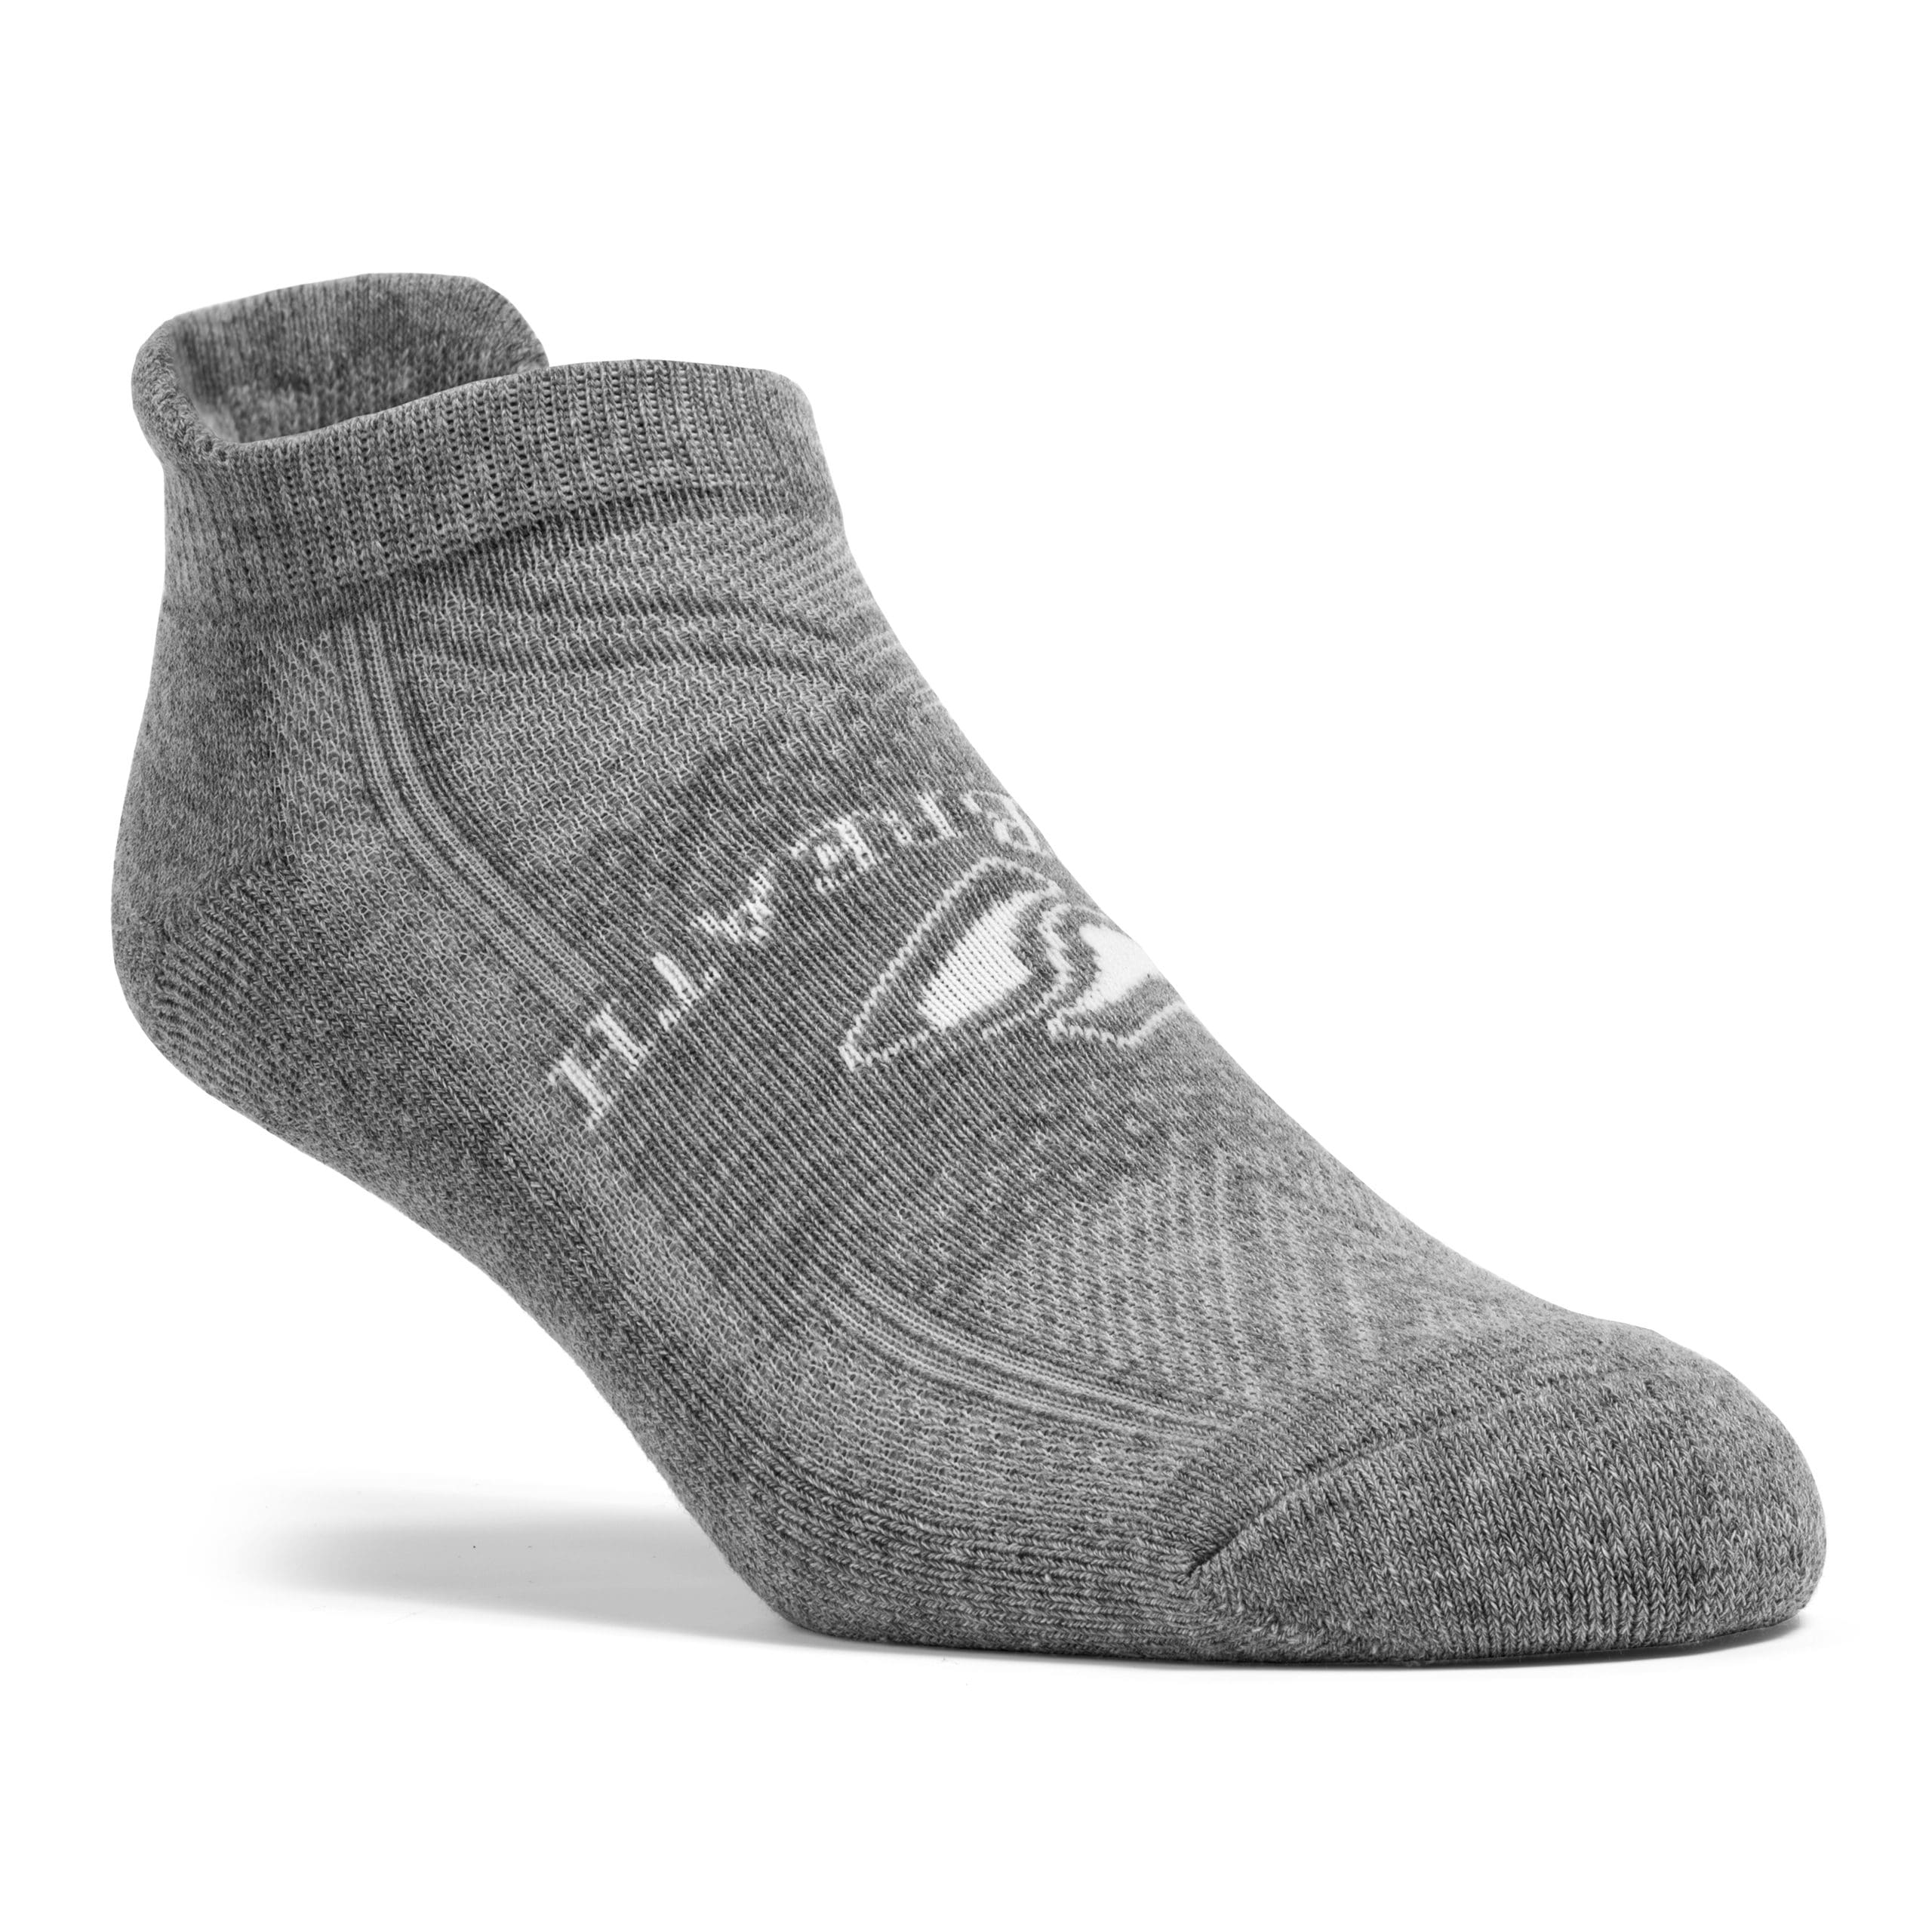 A ghost mannequin photo of a grey athletic sock.